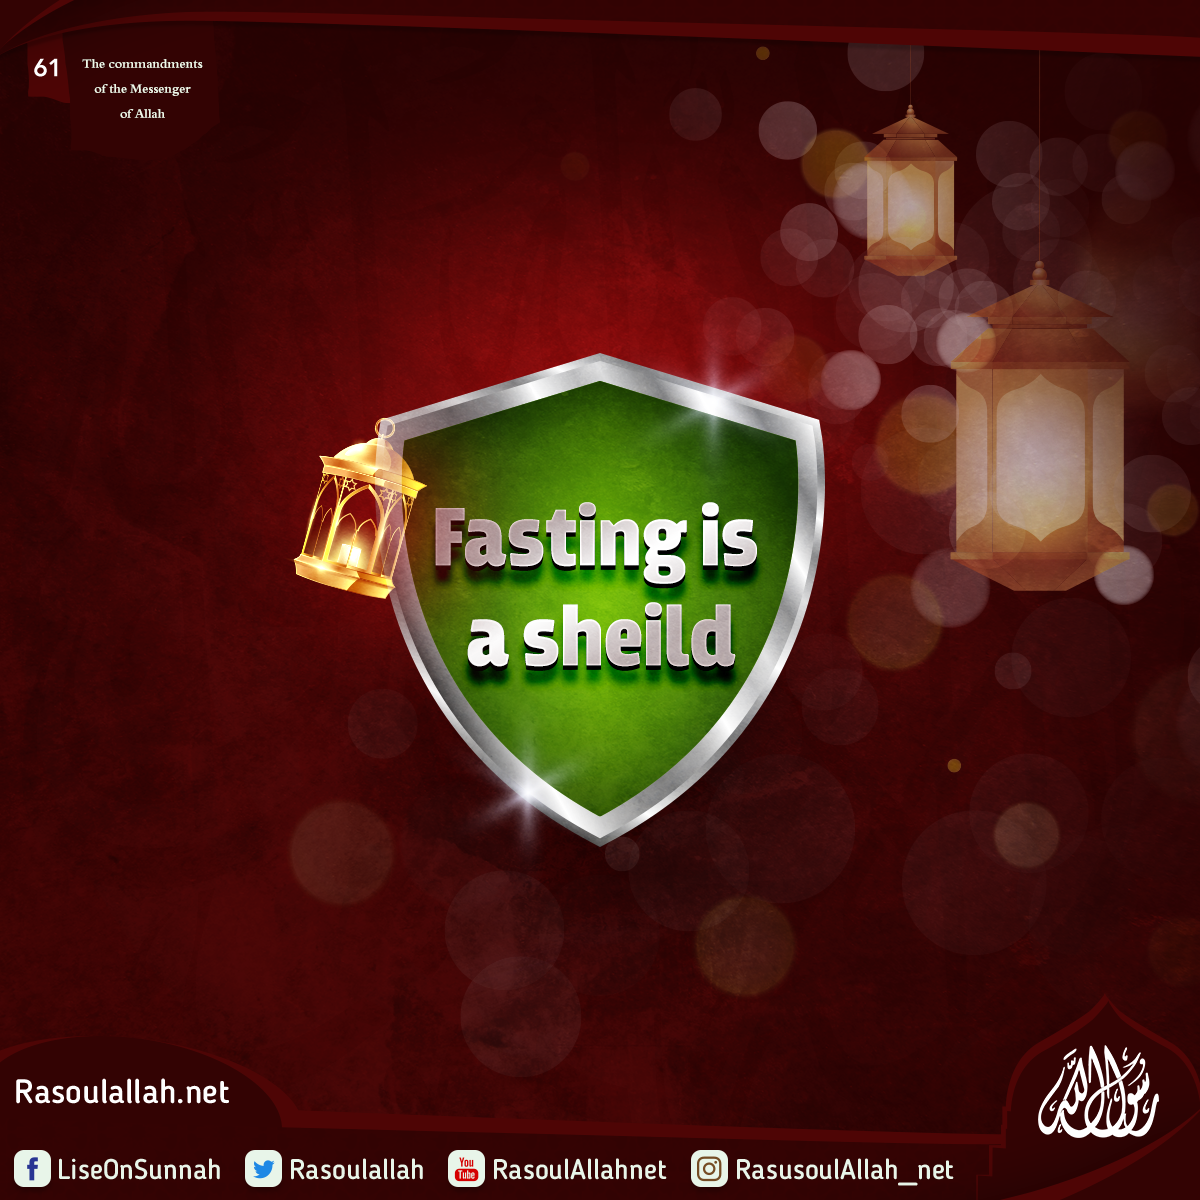 Fasting is a sheild